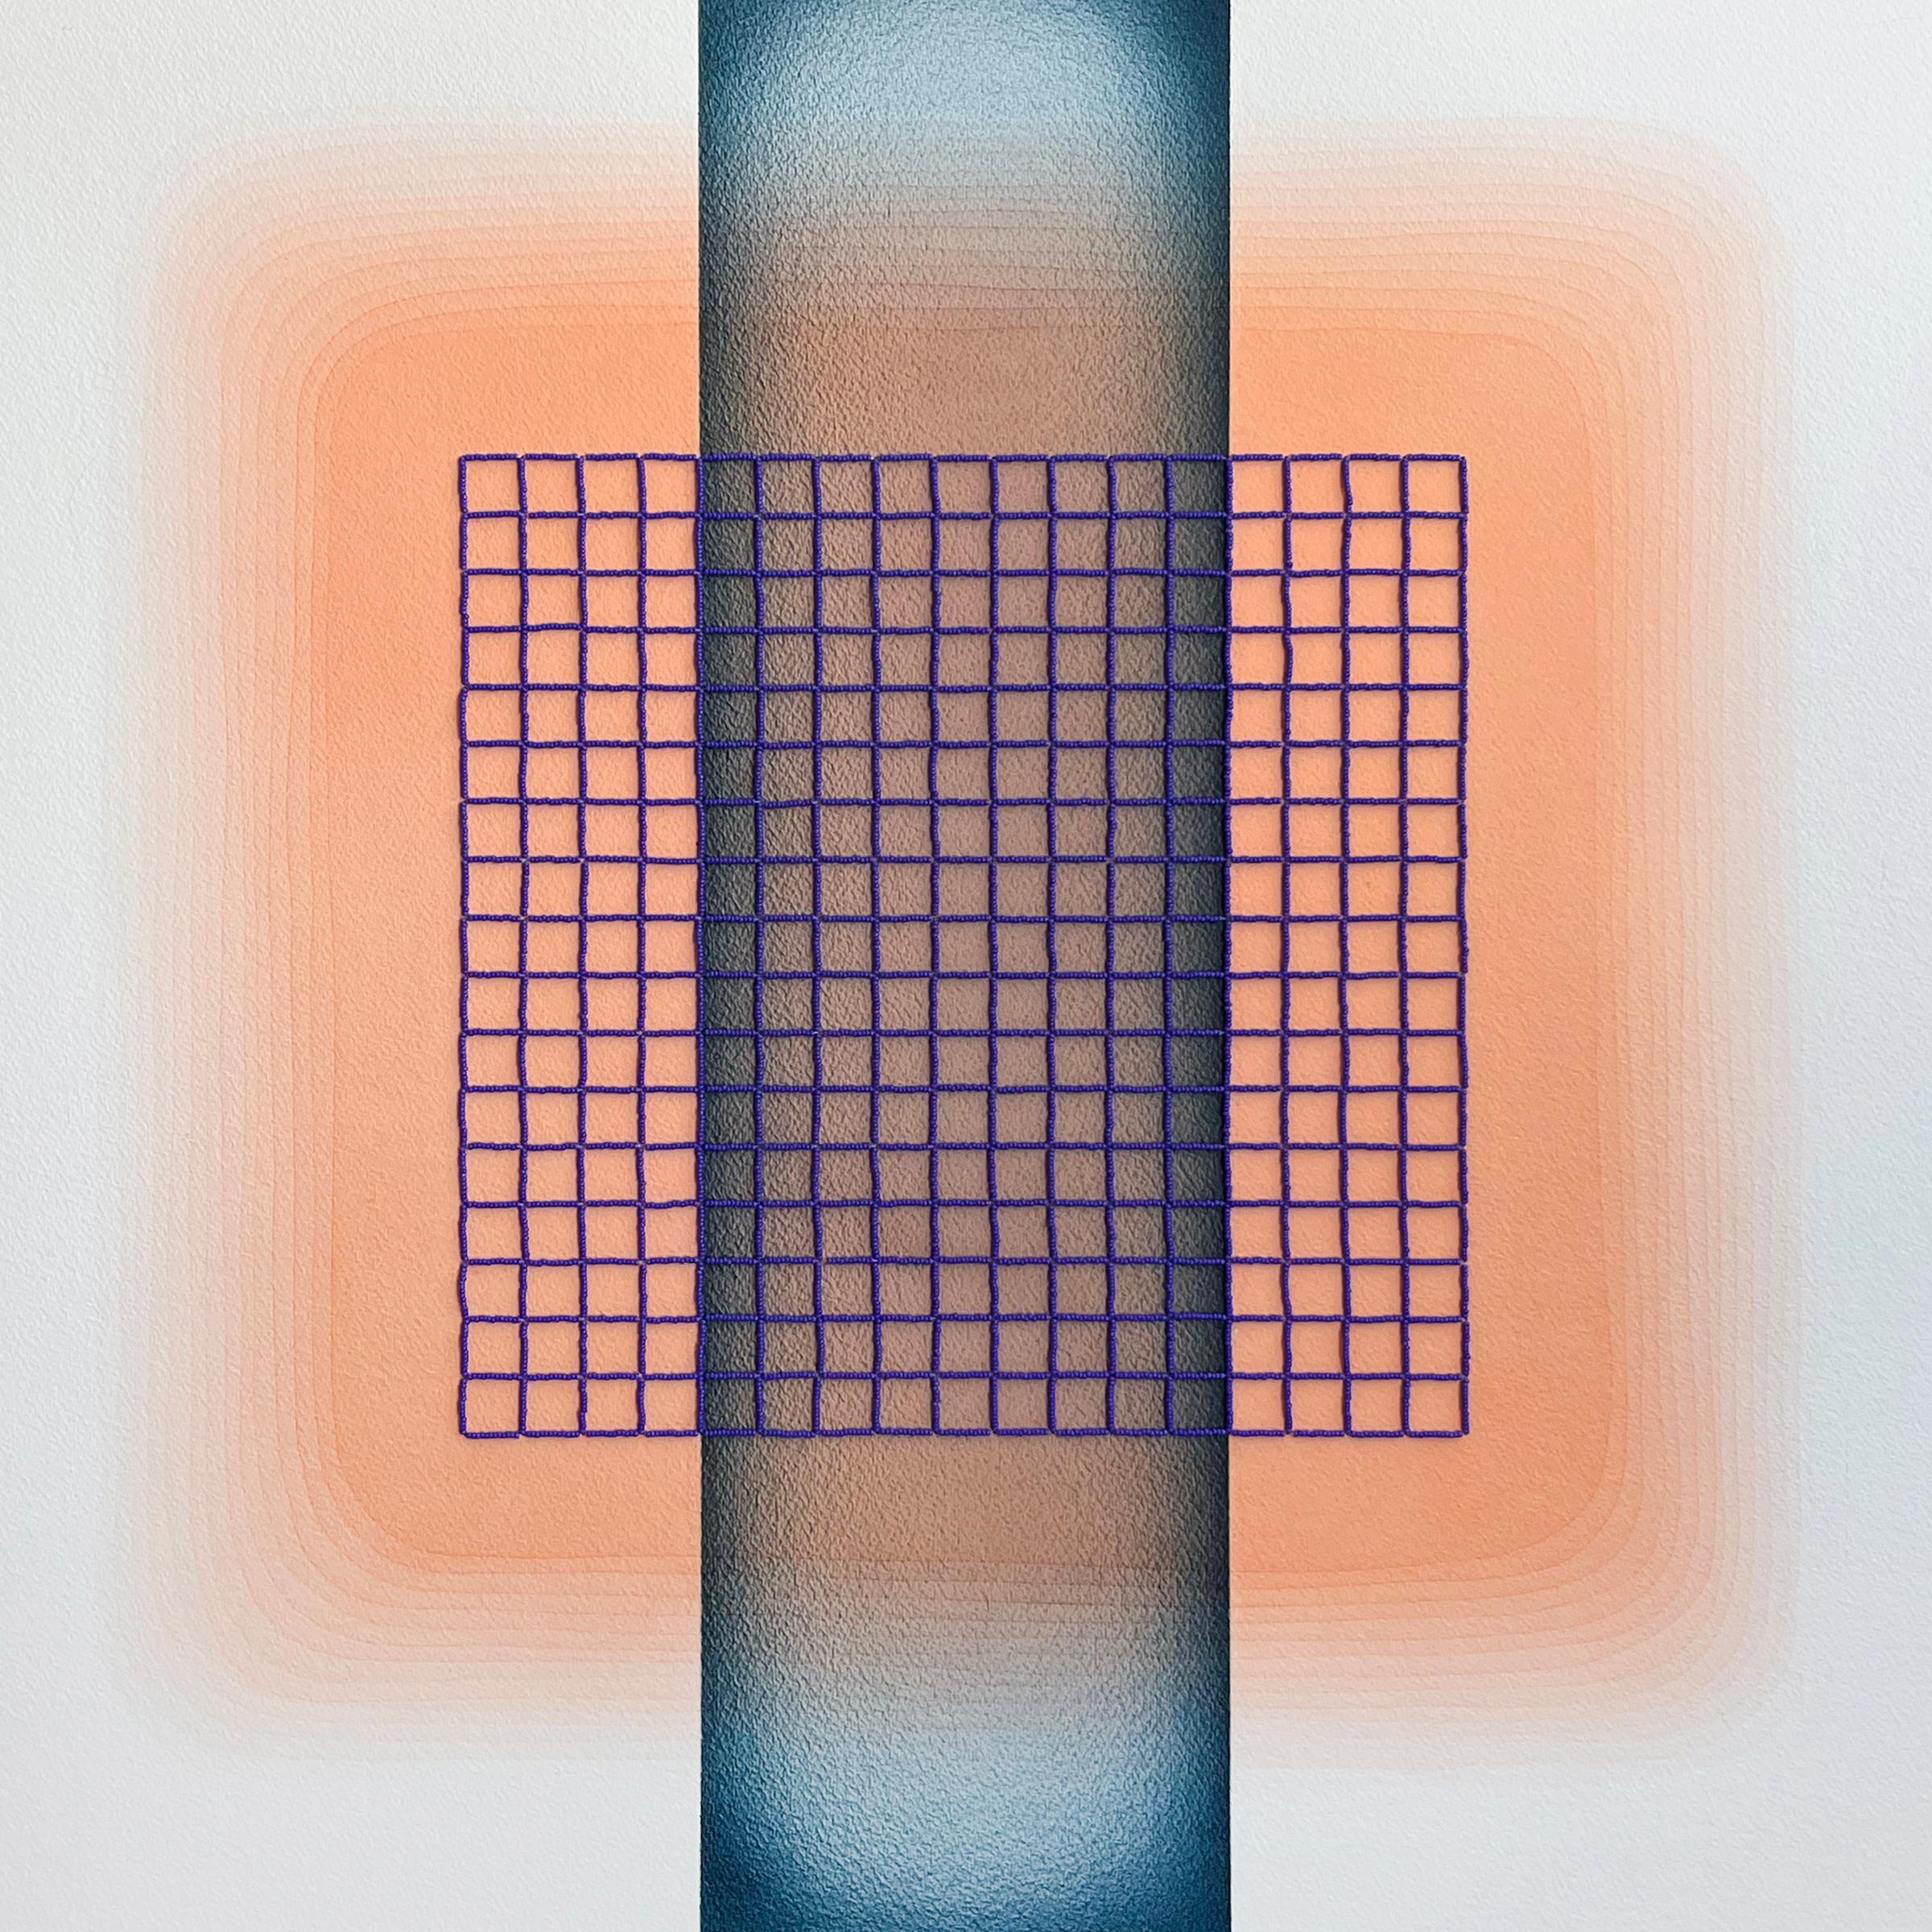 'Color Interaction IV (8)' - color theory, glass beads, bright, saturated, grid - Contemporary Mixed Media Art by Gretchen Wagner